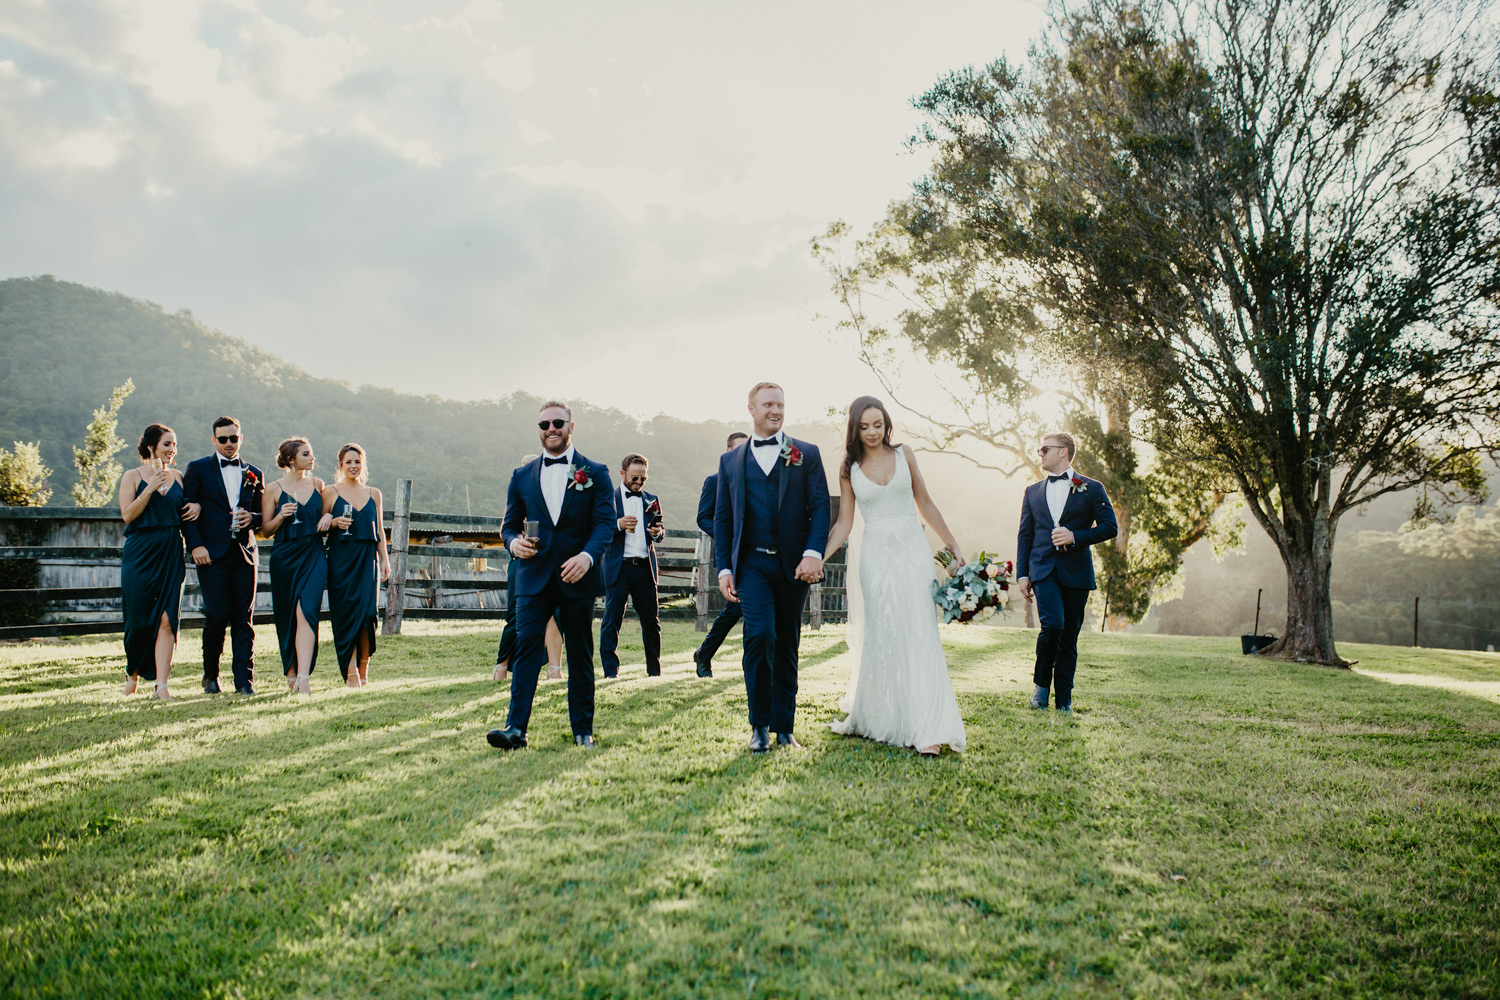 True-North-Photography-Cowbell-Creek-Bridal-party-golden-hour.jpg